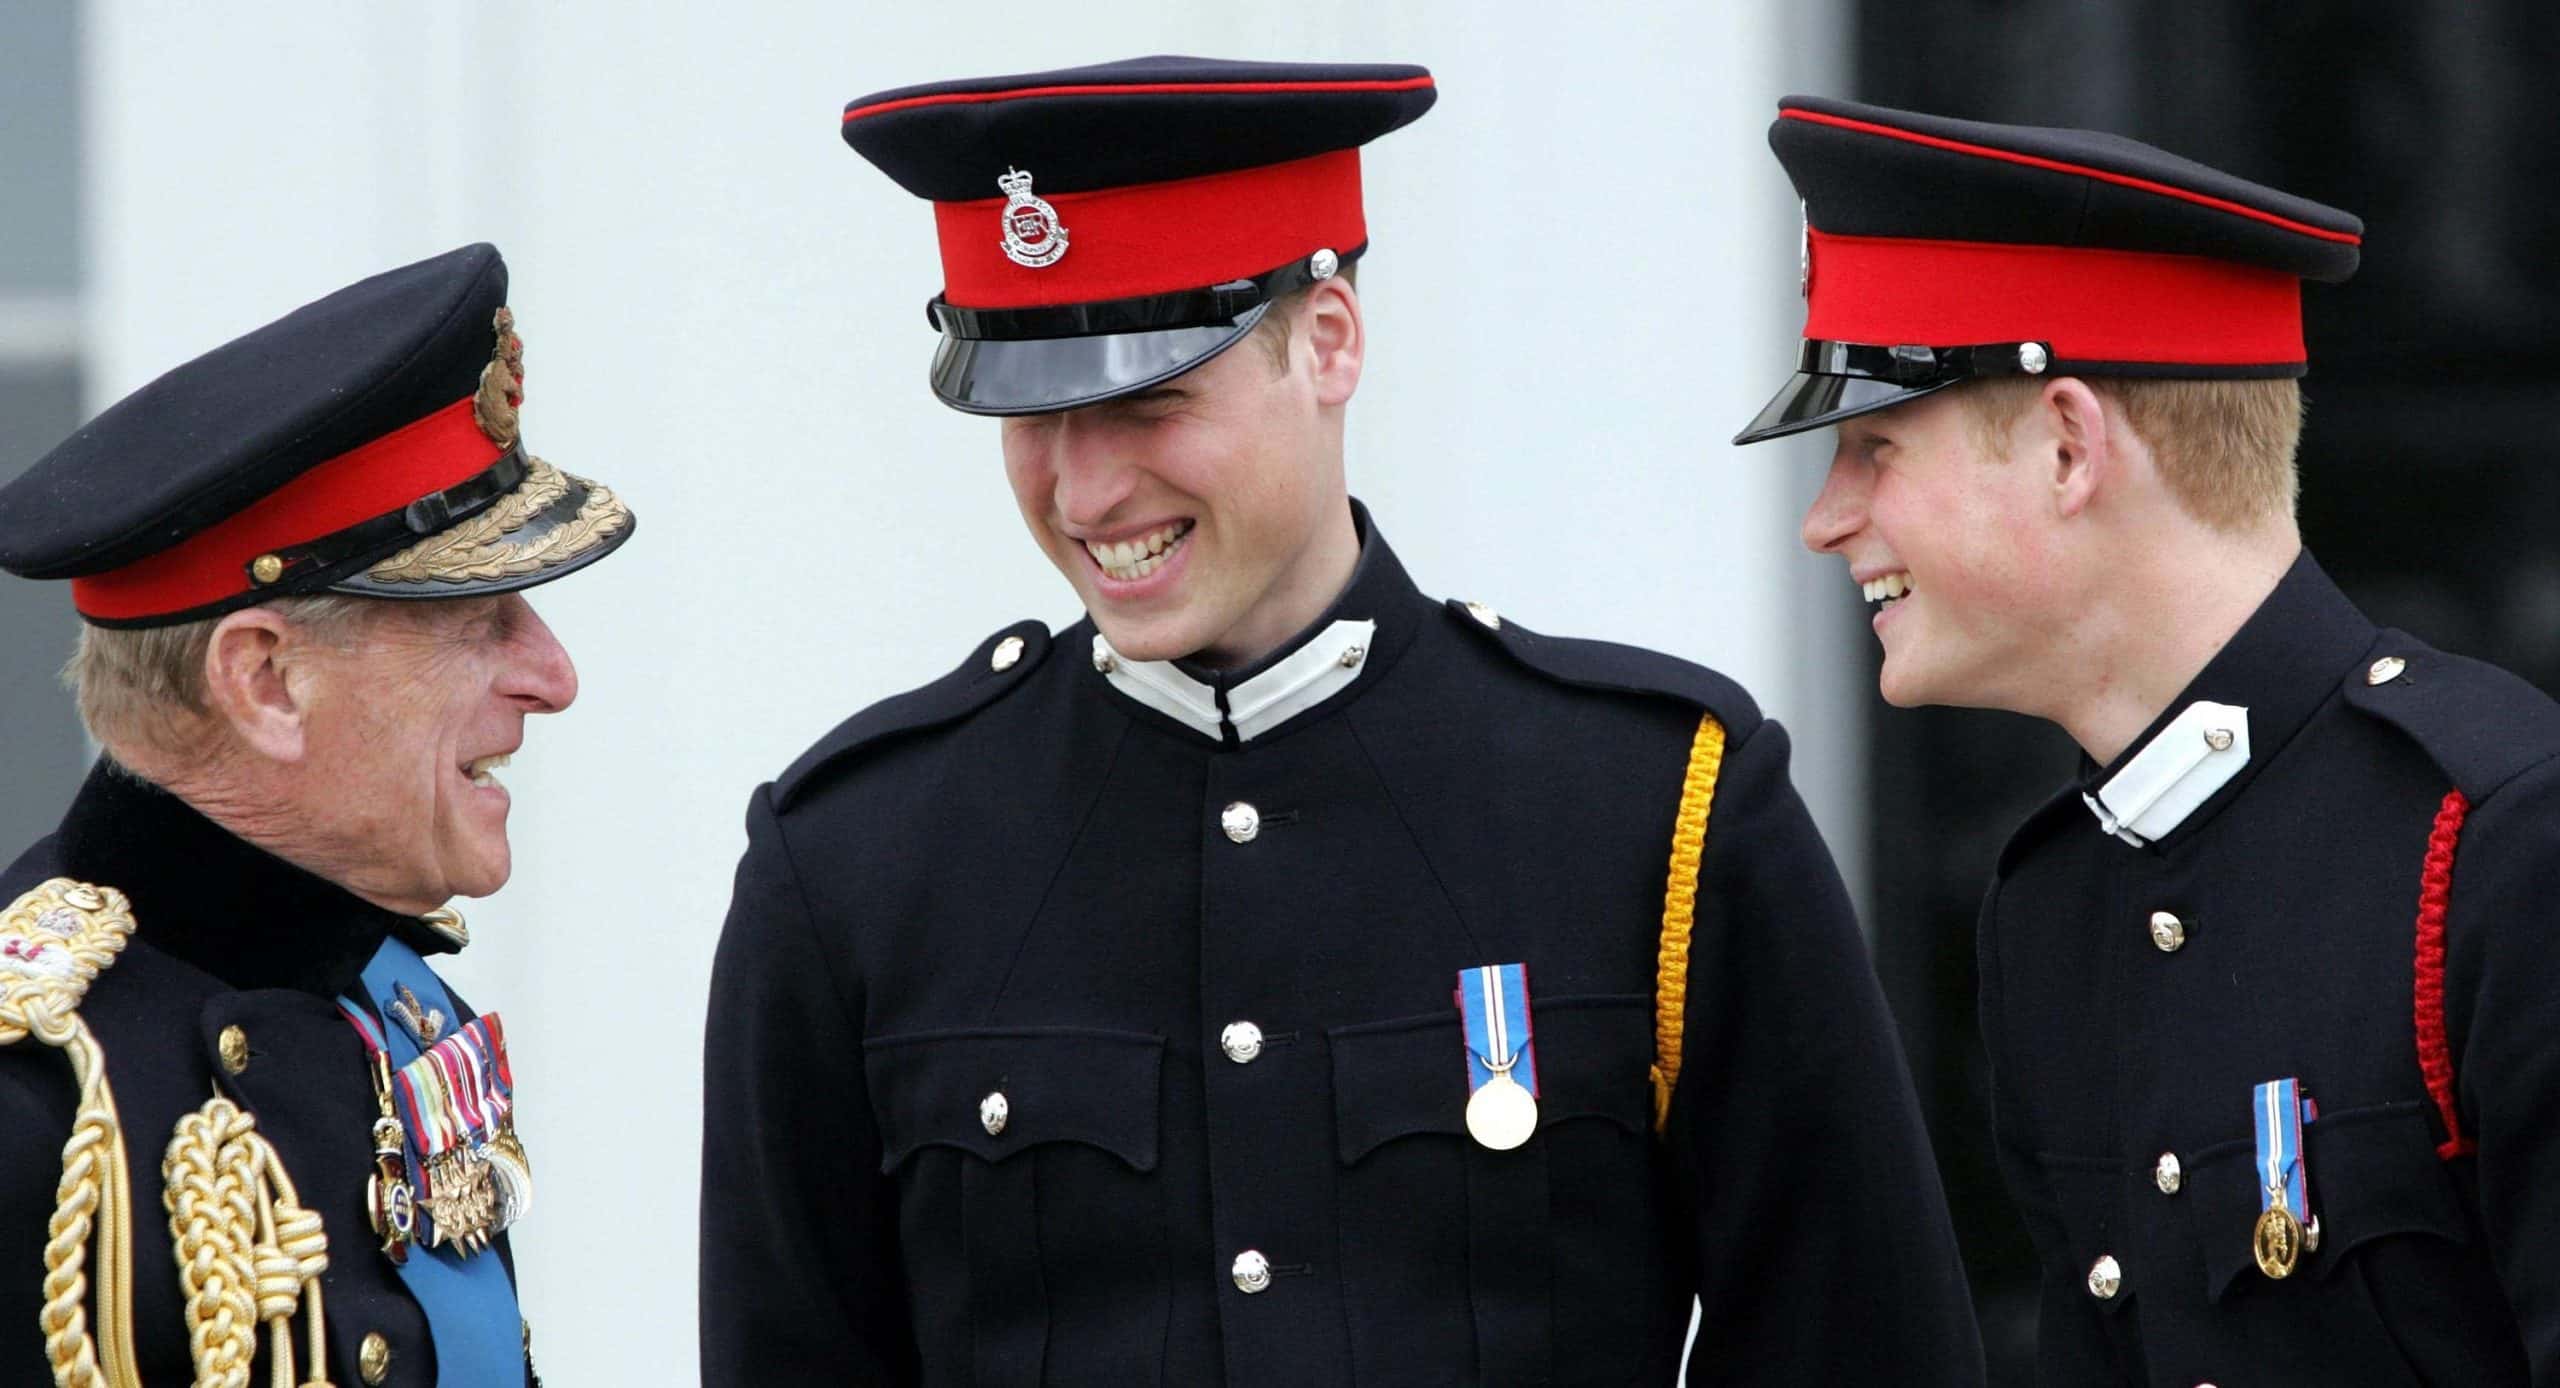 William and Harry won’t walk side-by-side at Philip’s funeral